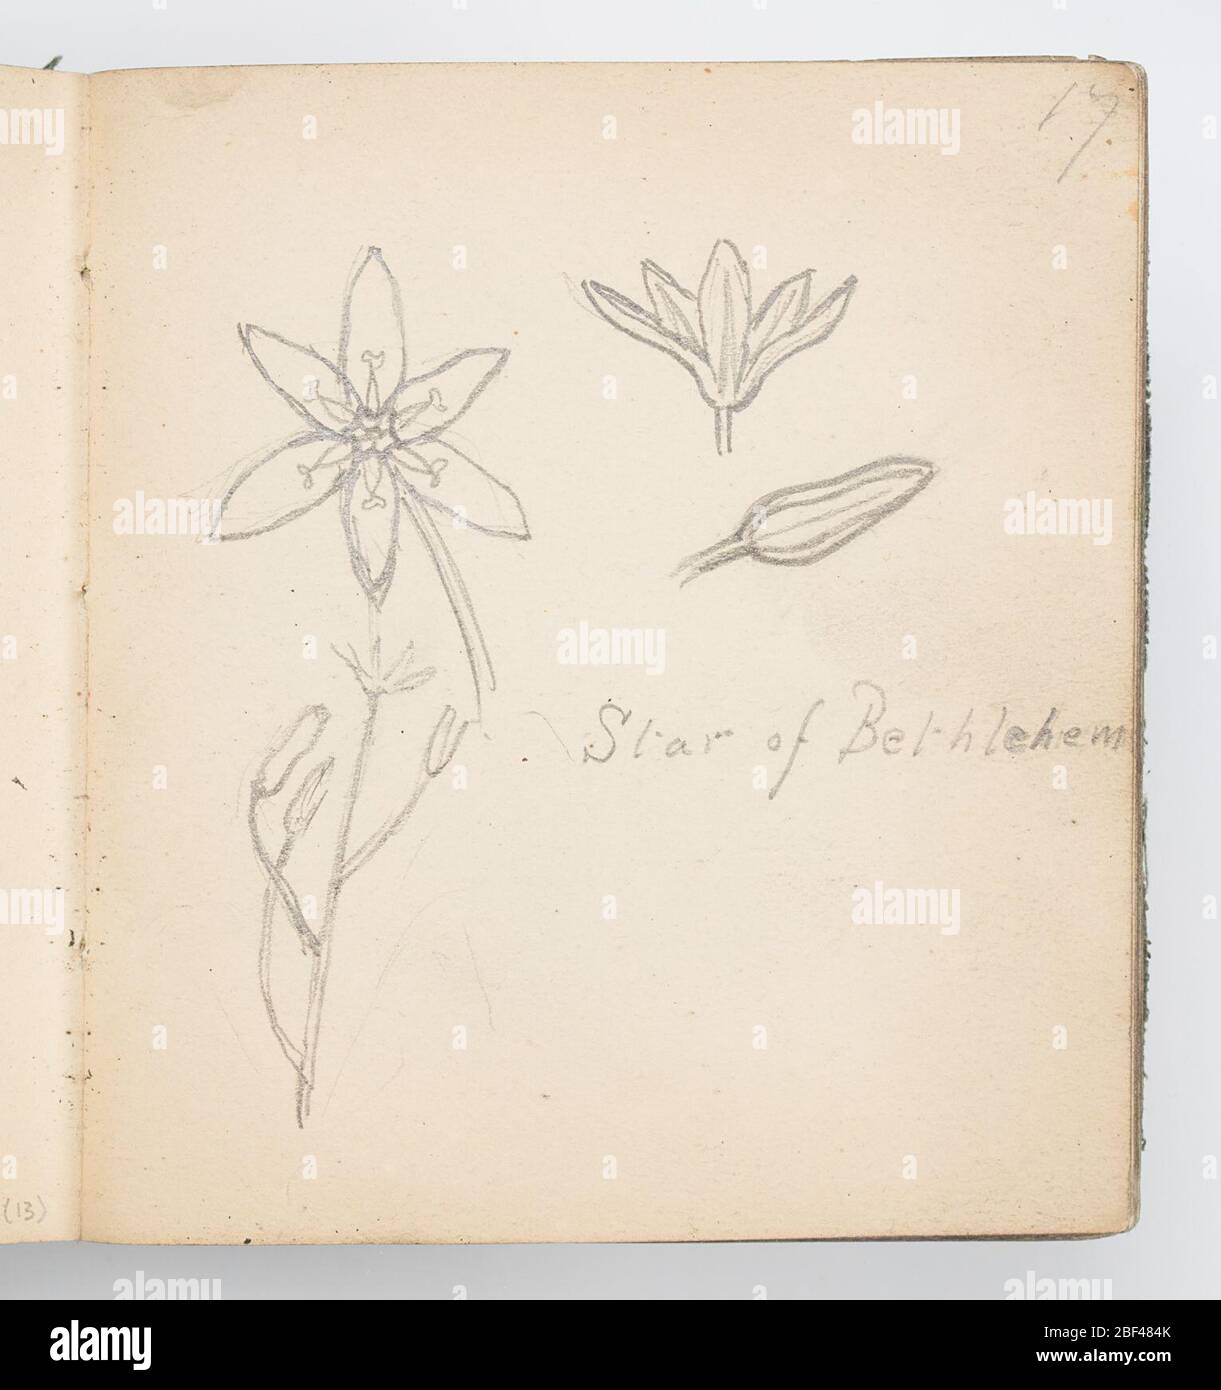 Sketchbook Page Star of Bethlehem. Recto: Studies of the Star of Bethlehem, a flower with six long, pointed petals; full plant shown as well as flower from the top, in profile, and as a closed bud.Verso: Sketch of open flower with bud, two leaves, and stem. Stock Photo